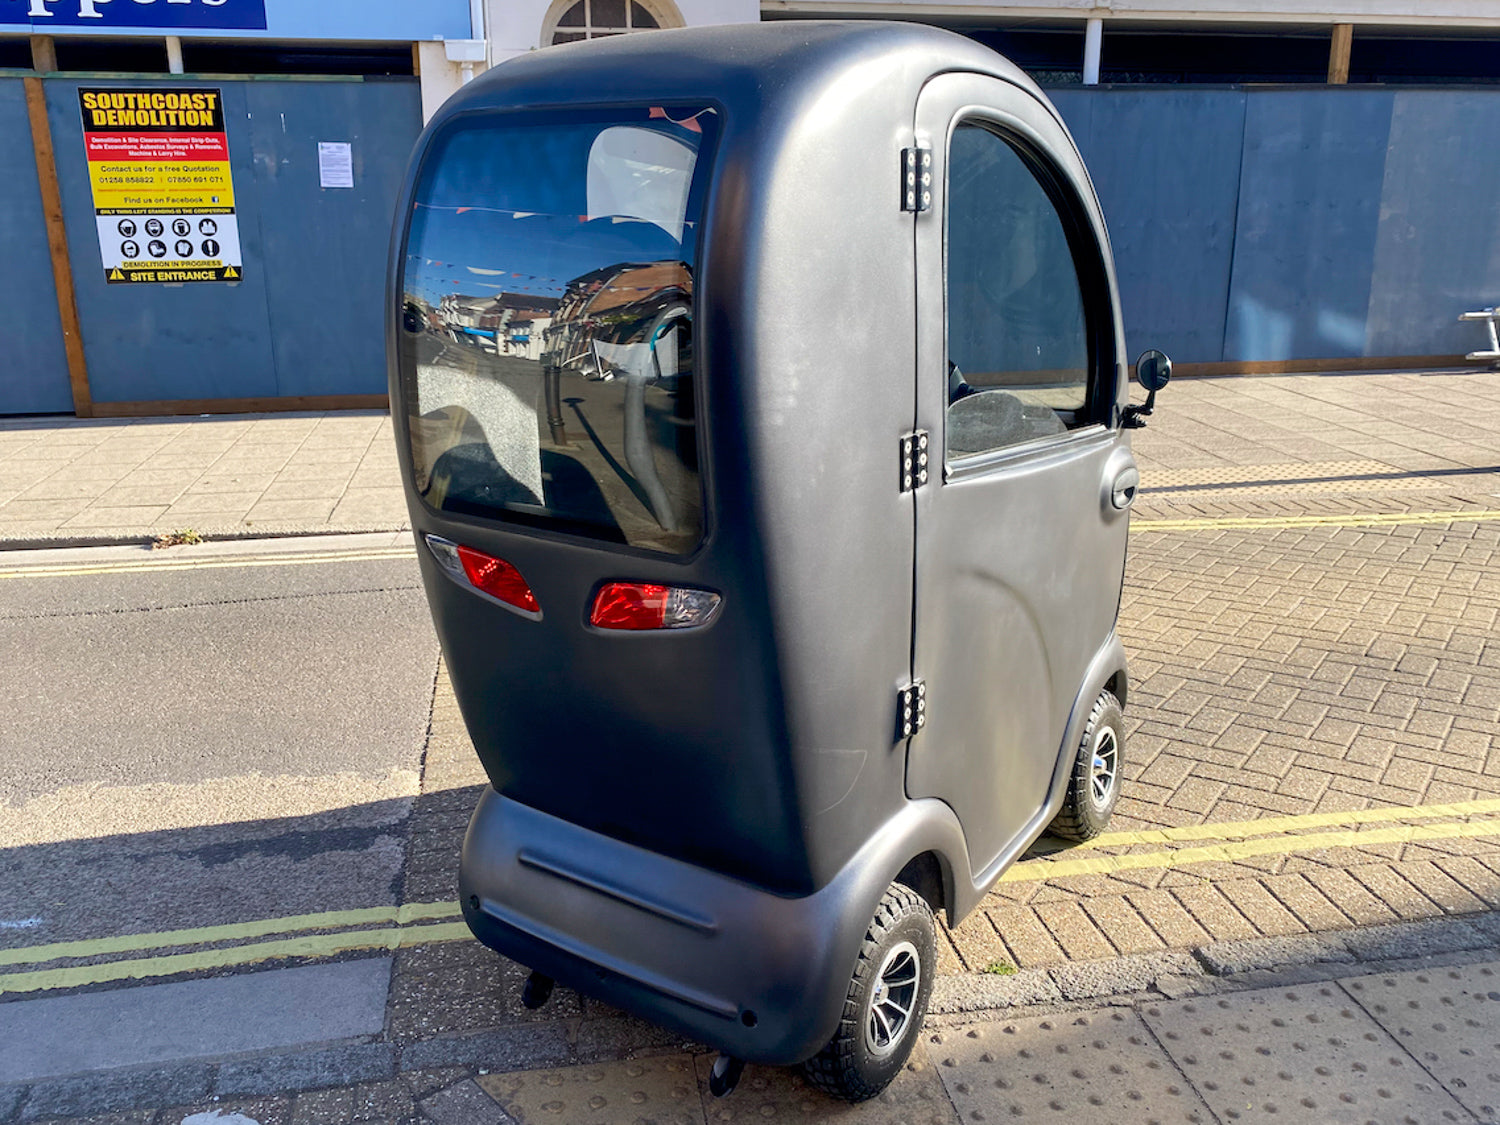 2017 Scooterpac Cabin Car MK2 8mph Class 3 Covered Mobility Scooter Grey Road Legal